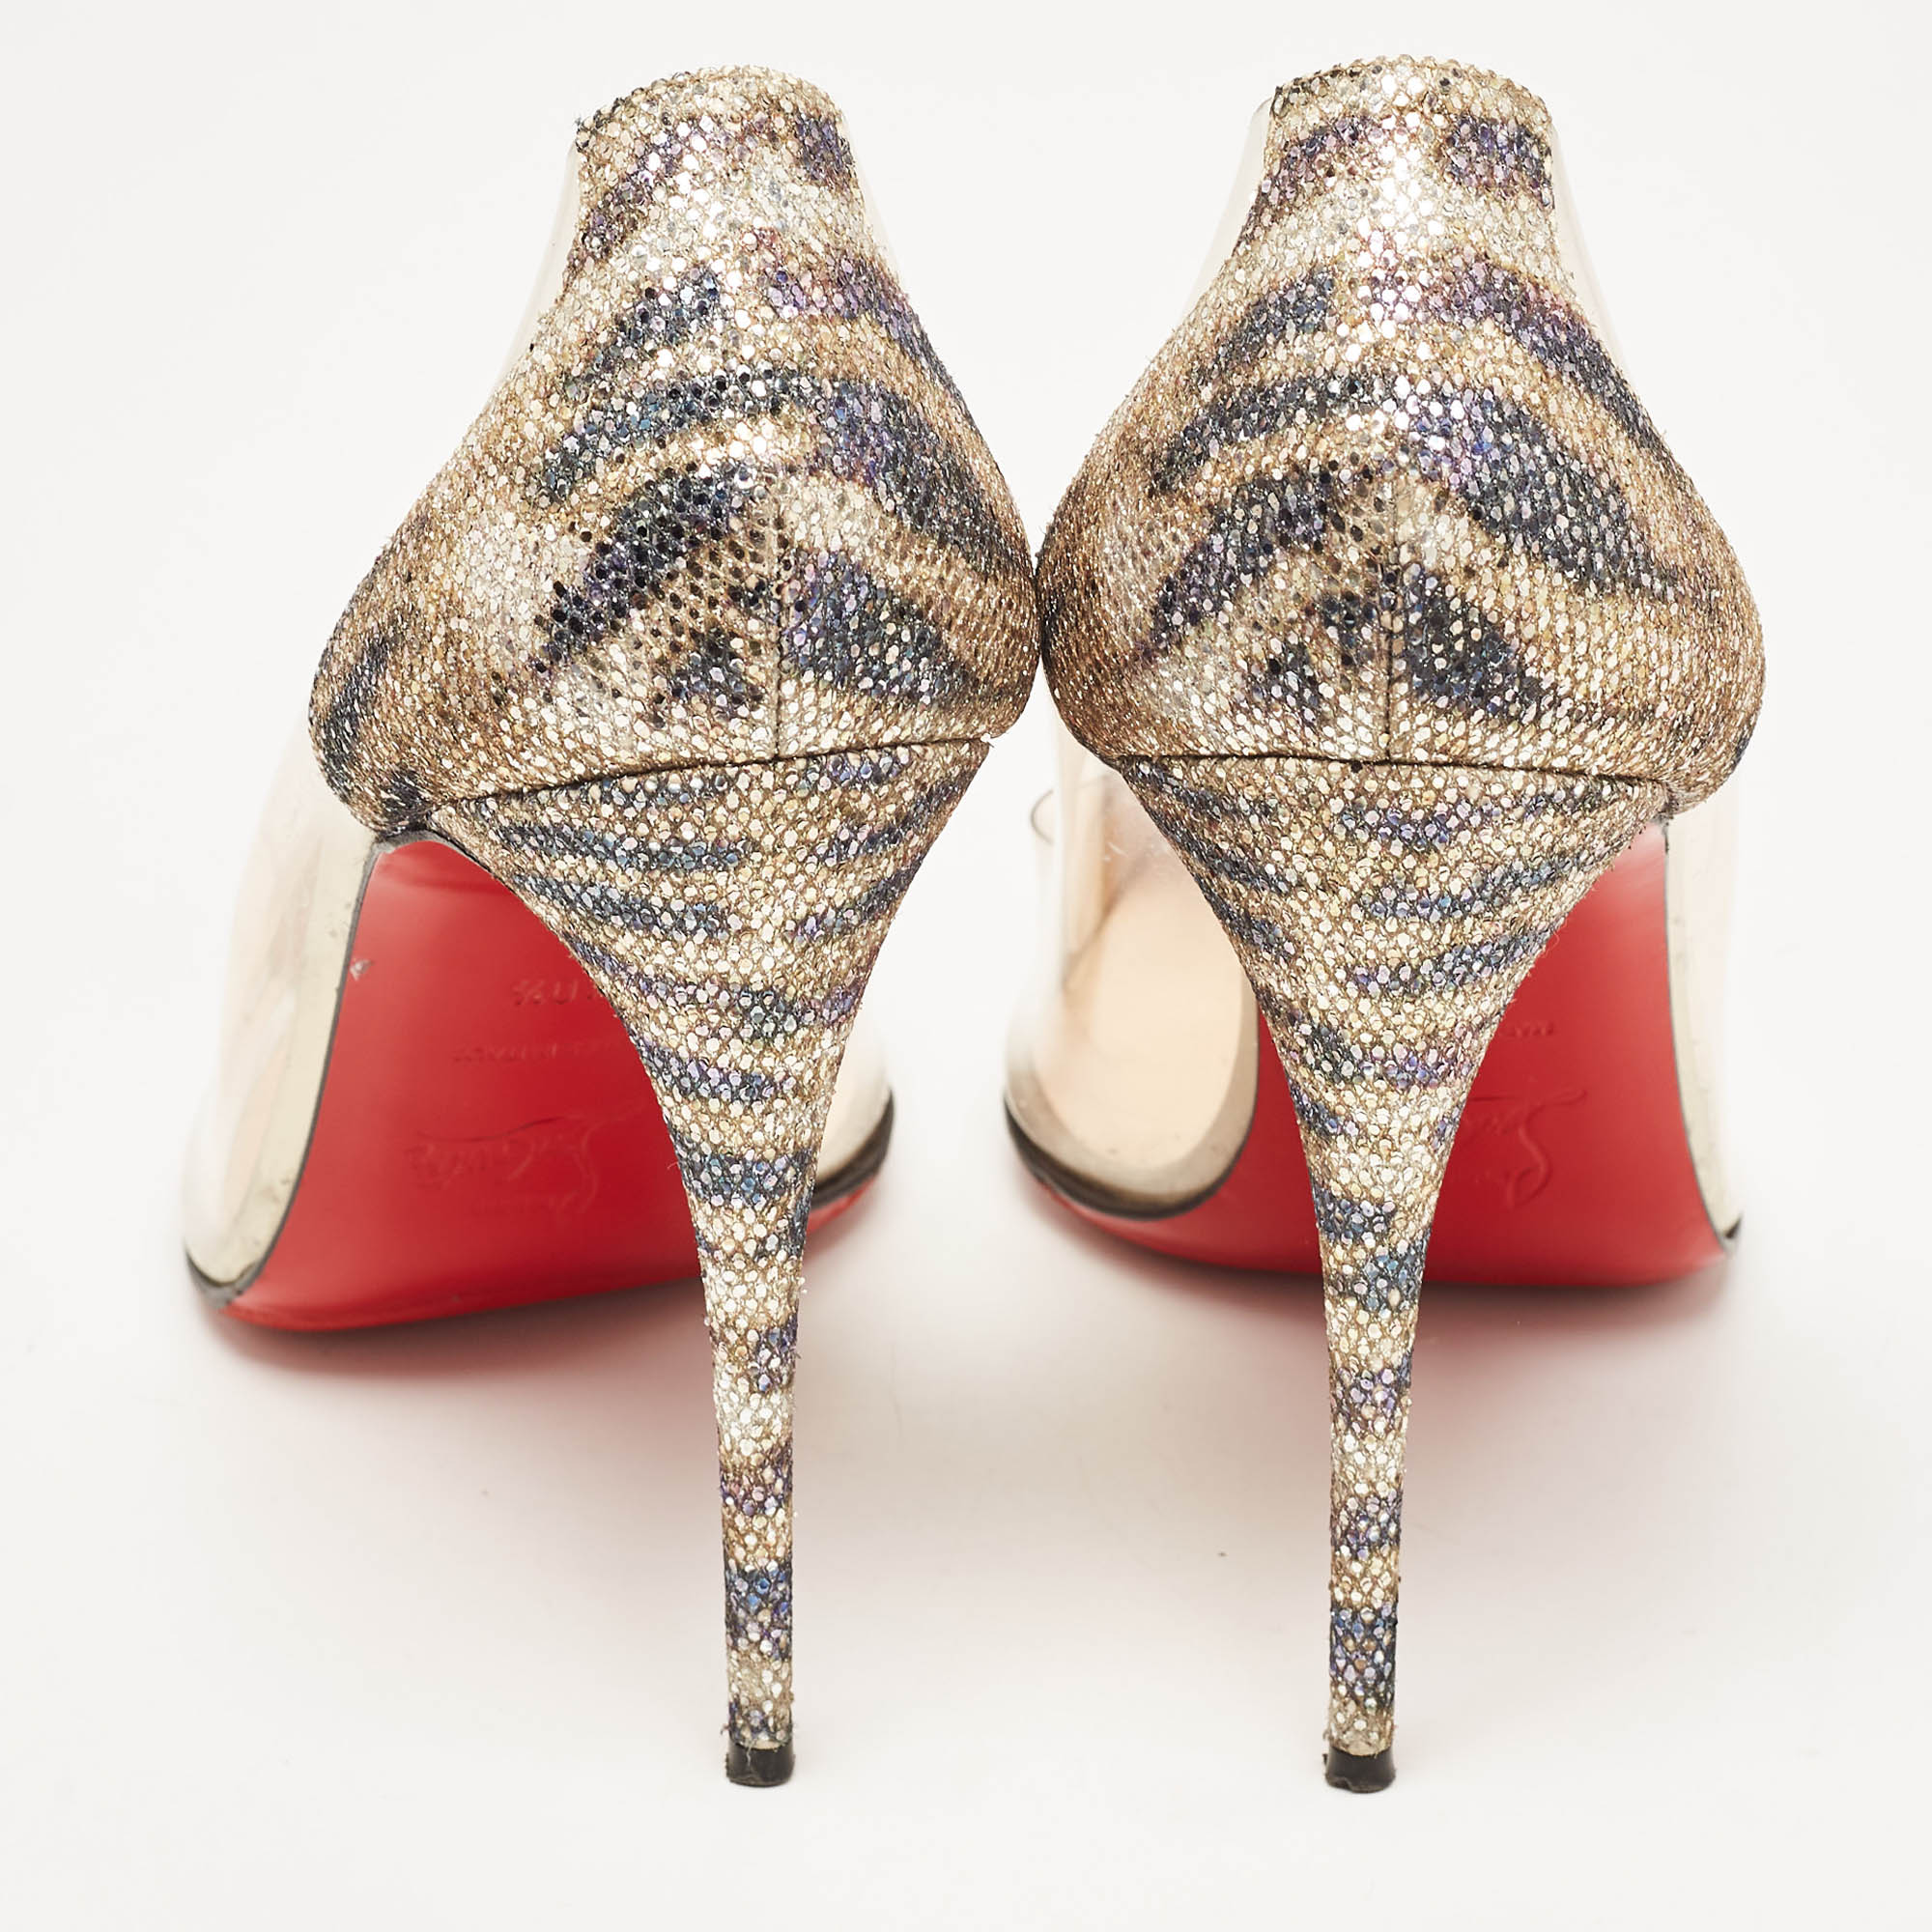 Christian Louboutin Metallic Glitter And PVC New Debout Pointed Toe Pumps Size 40.5